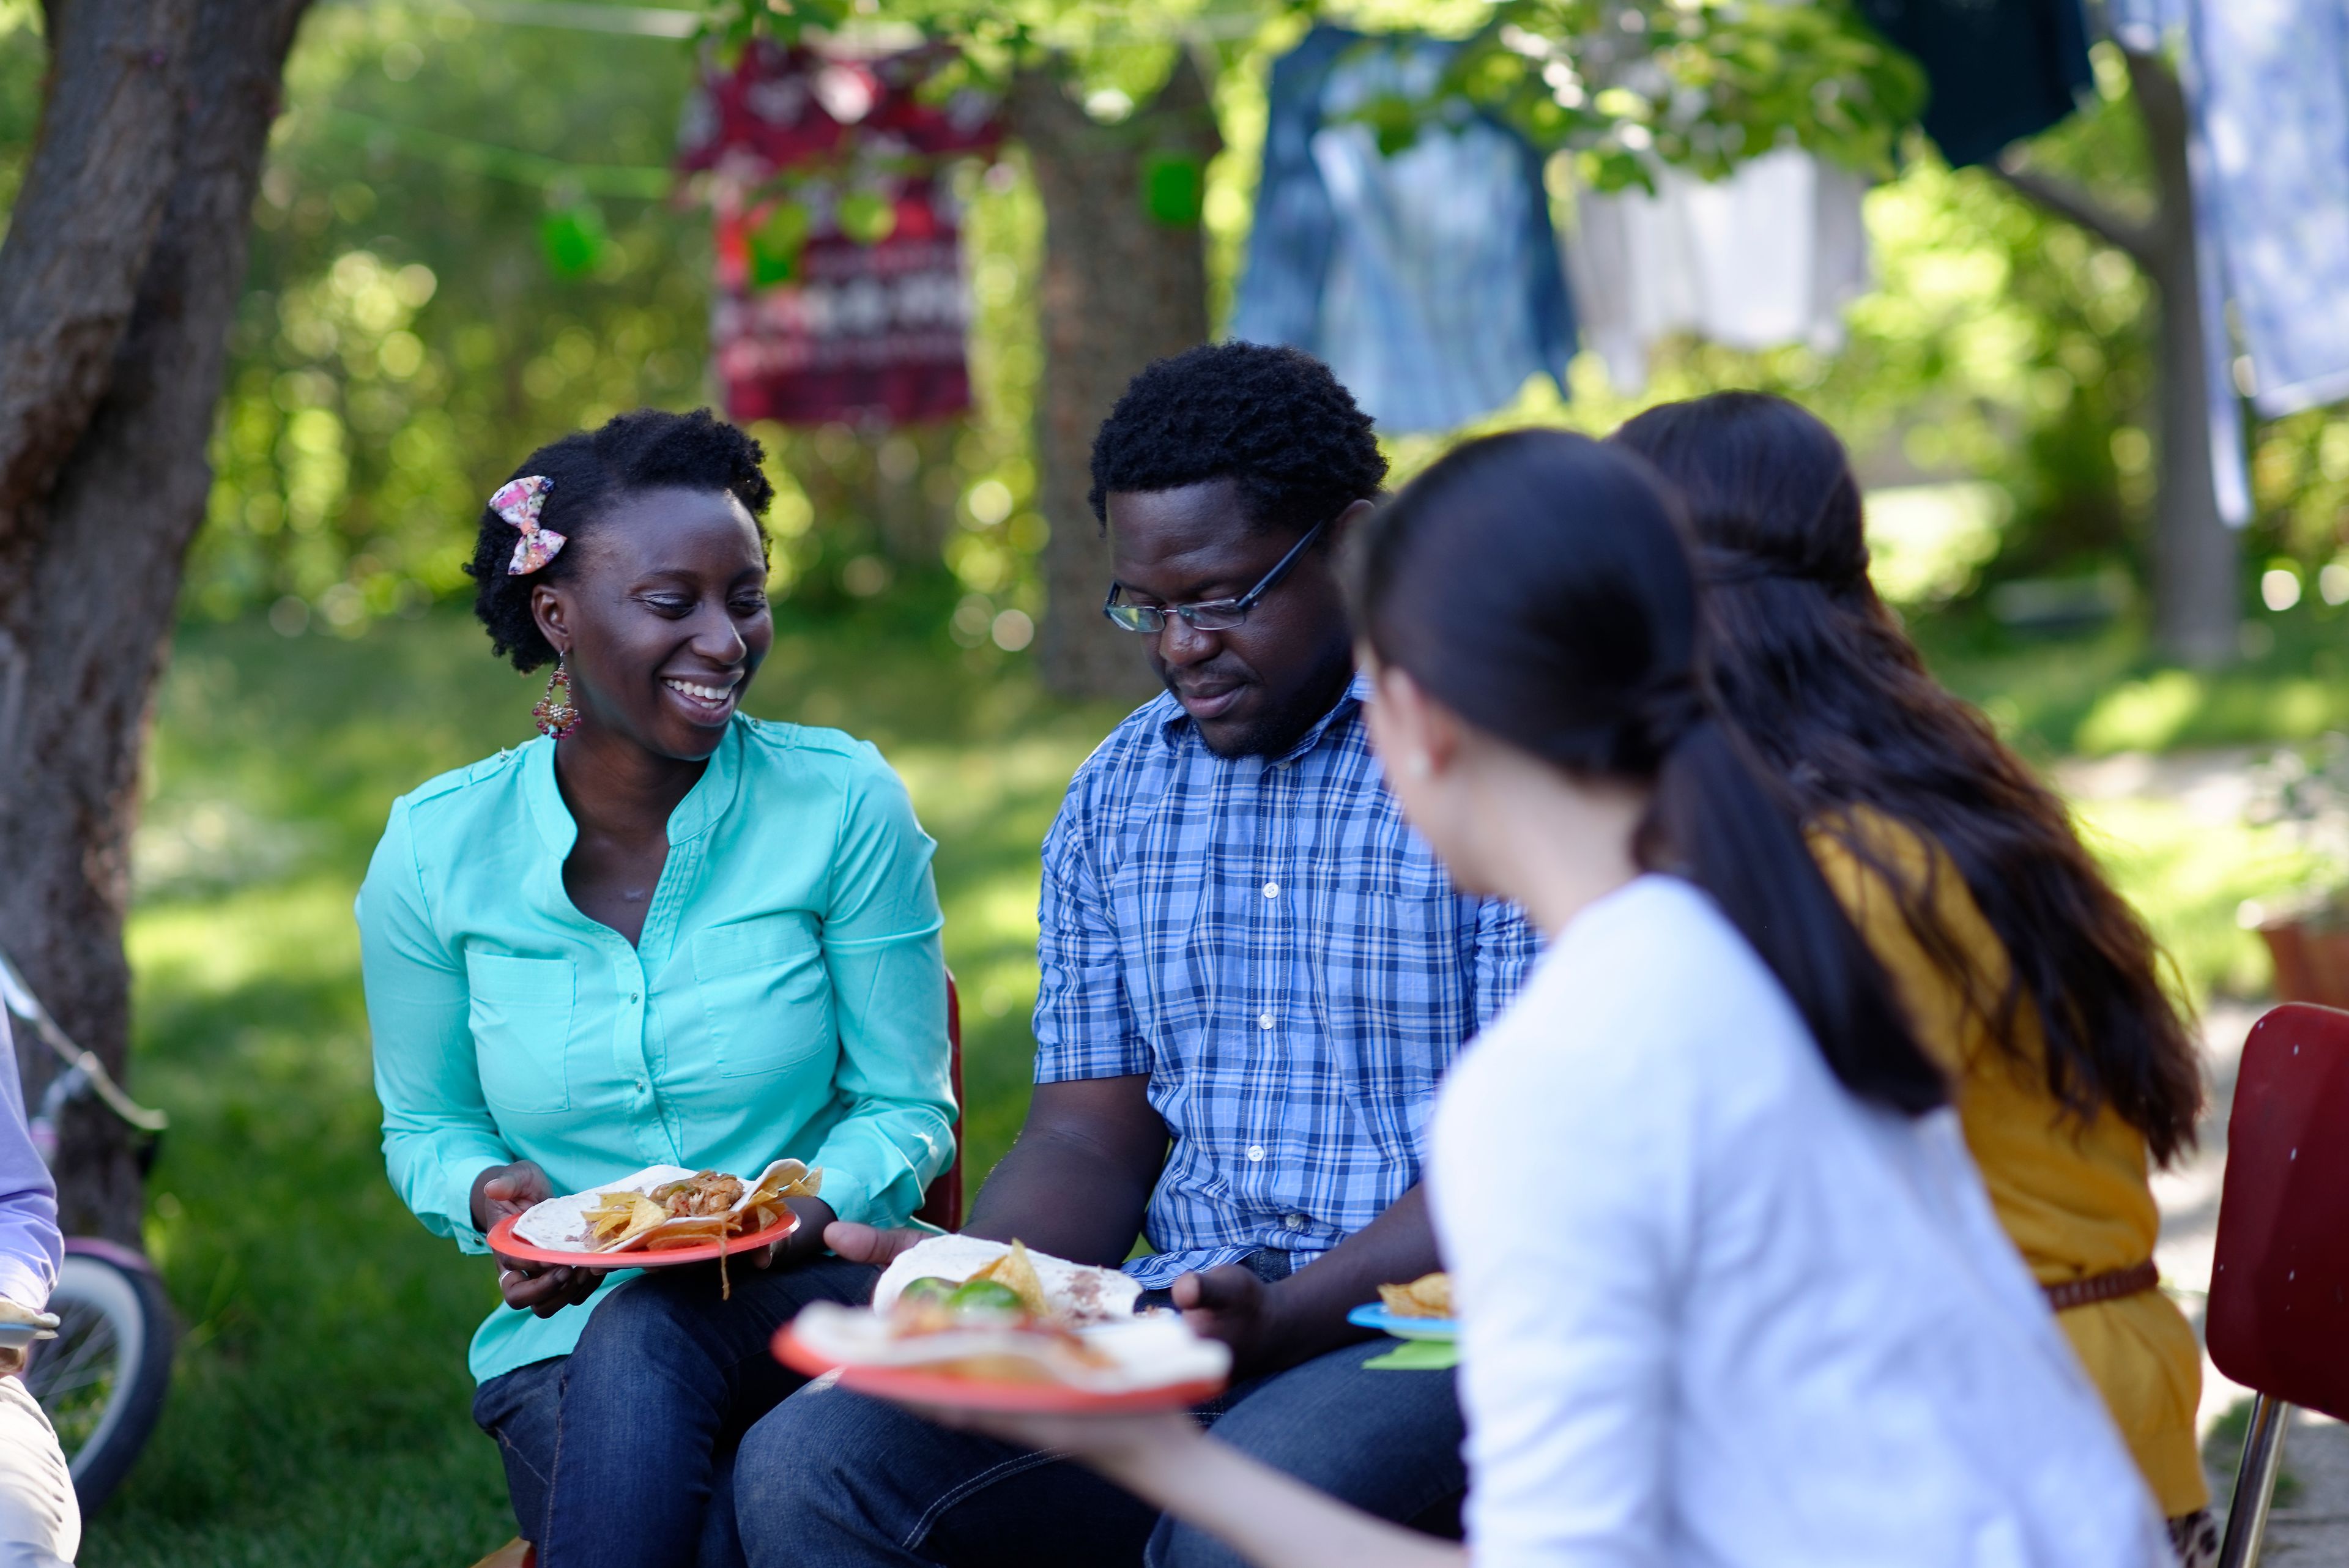 Some young adults sit together and eat at a picnic.